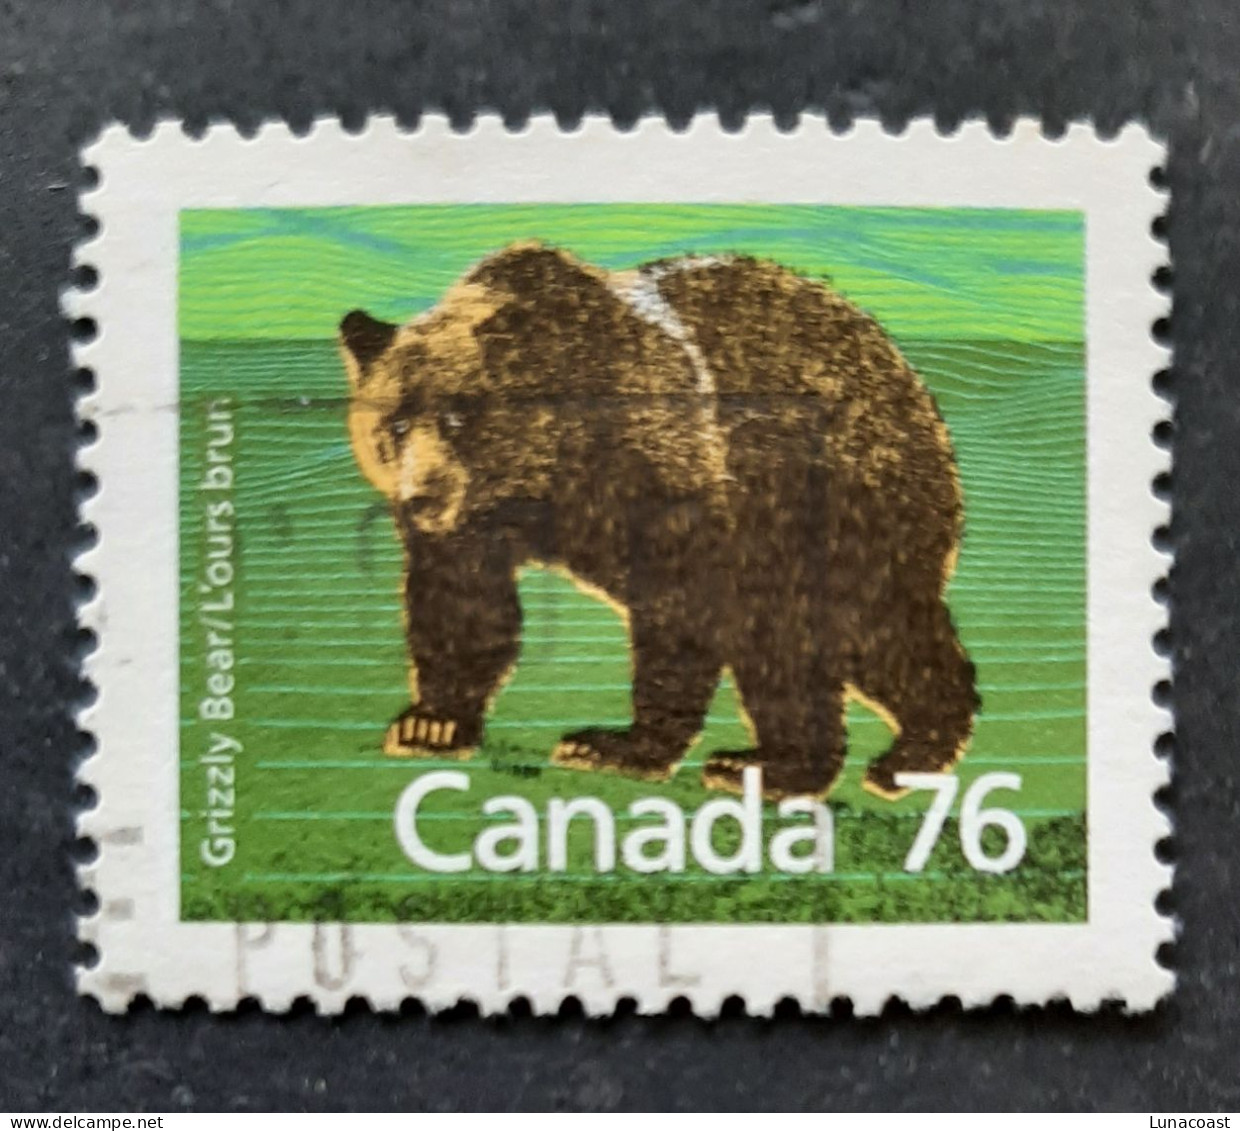 Canada 1989  USED  Sc1178a,   PERF. 12.5 X 13.1,  76c Grizzly Bear, - Usados